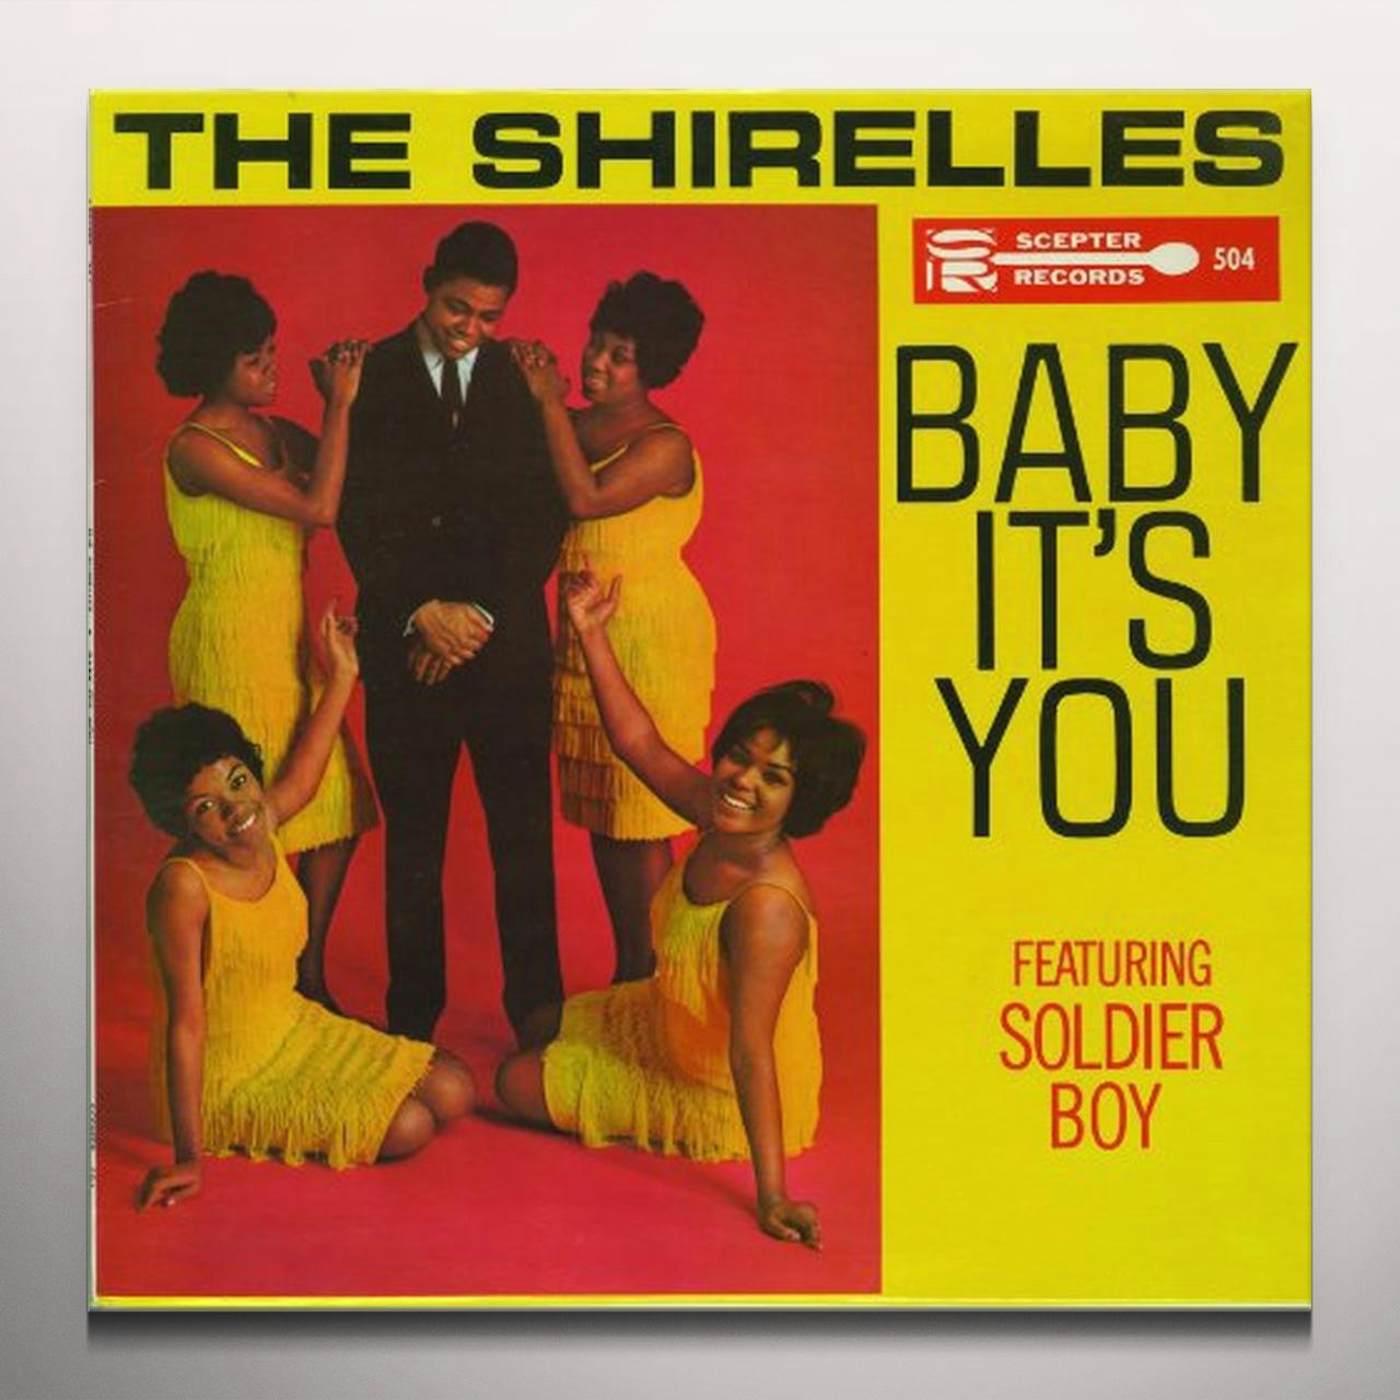 The Shirelles BABY ITS YOU Vinyl Record